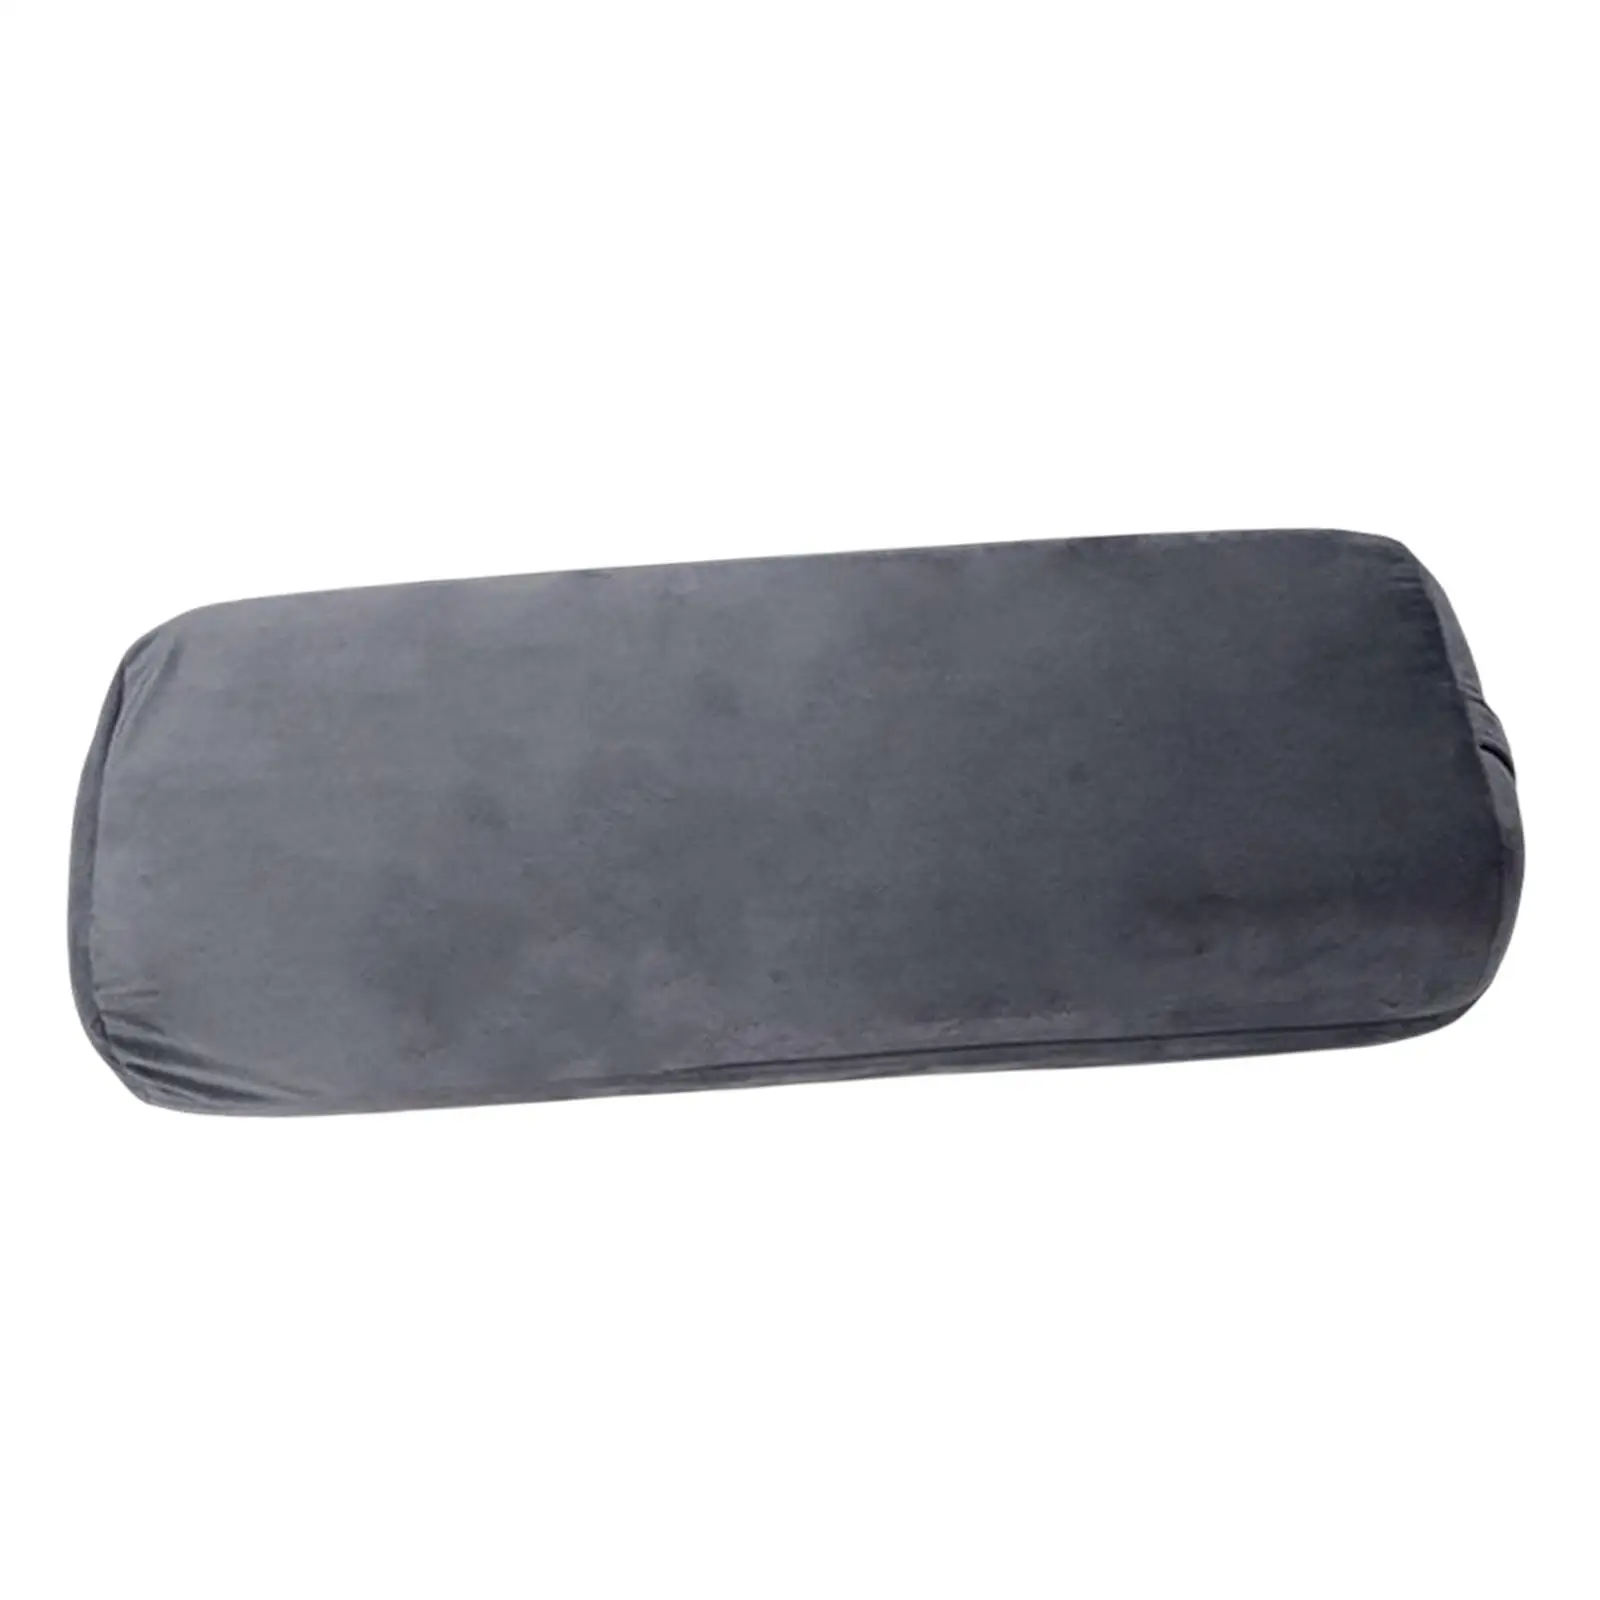 Yoga Bolster Pillow Removable Washable Cover Comfortable Sponge Meditation Cushion Support Pillow for Legs Soft Support